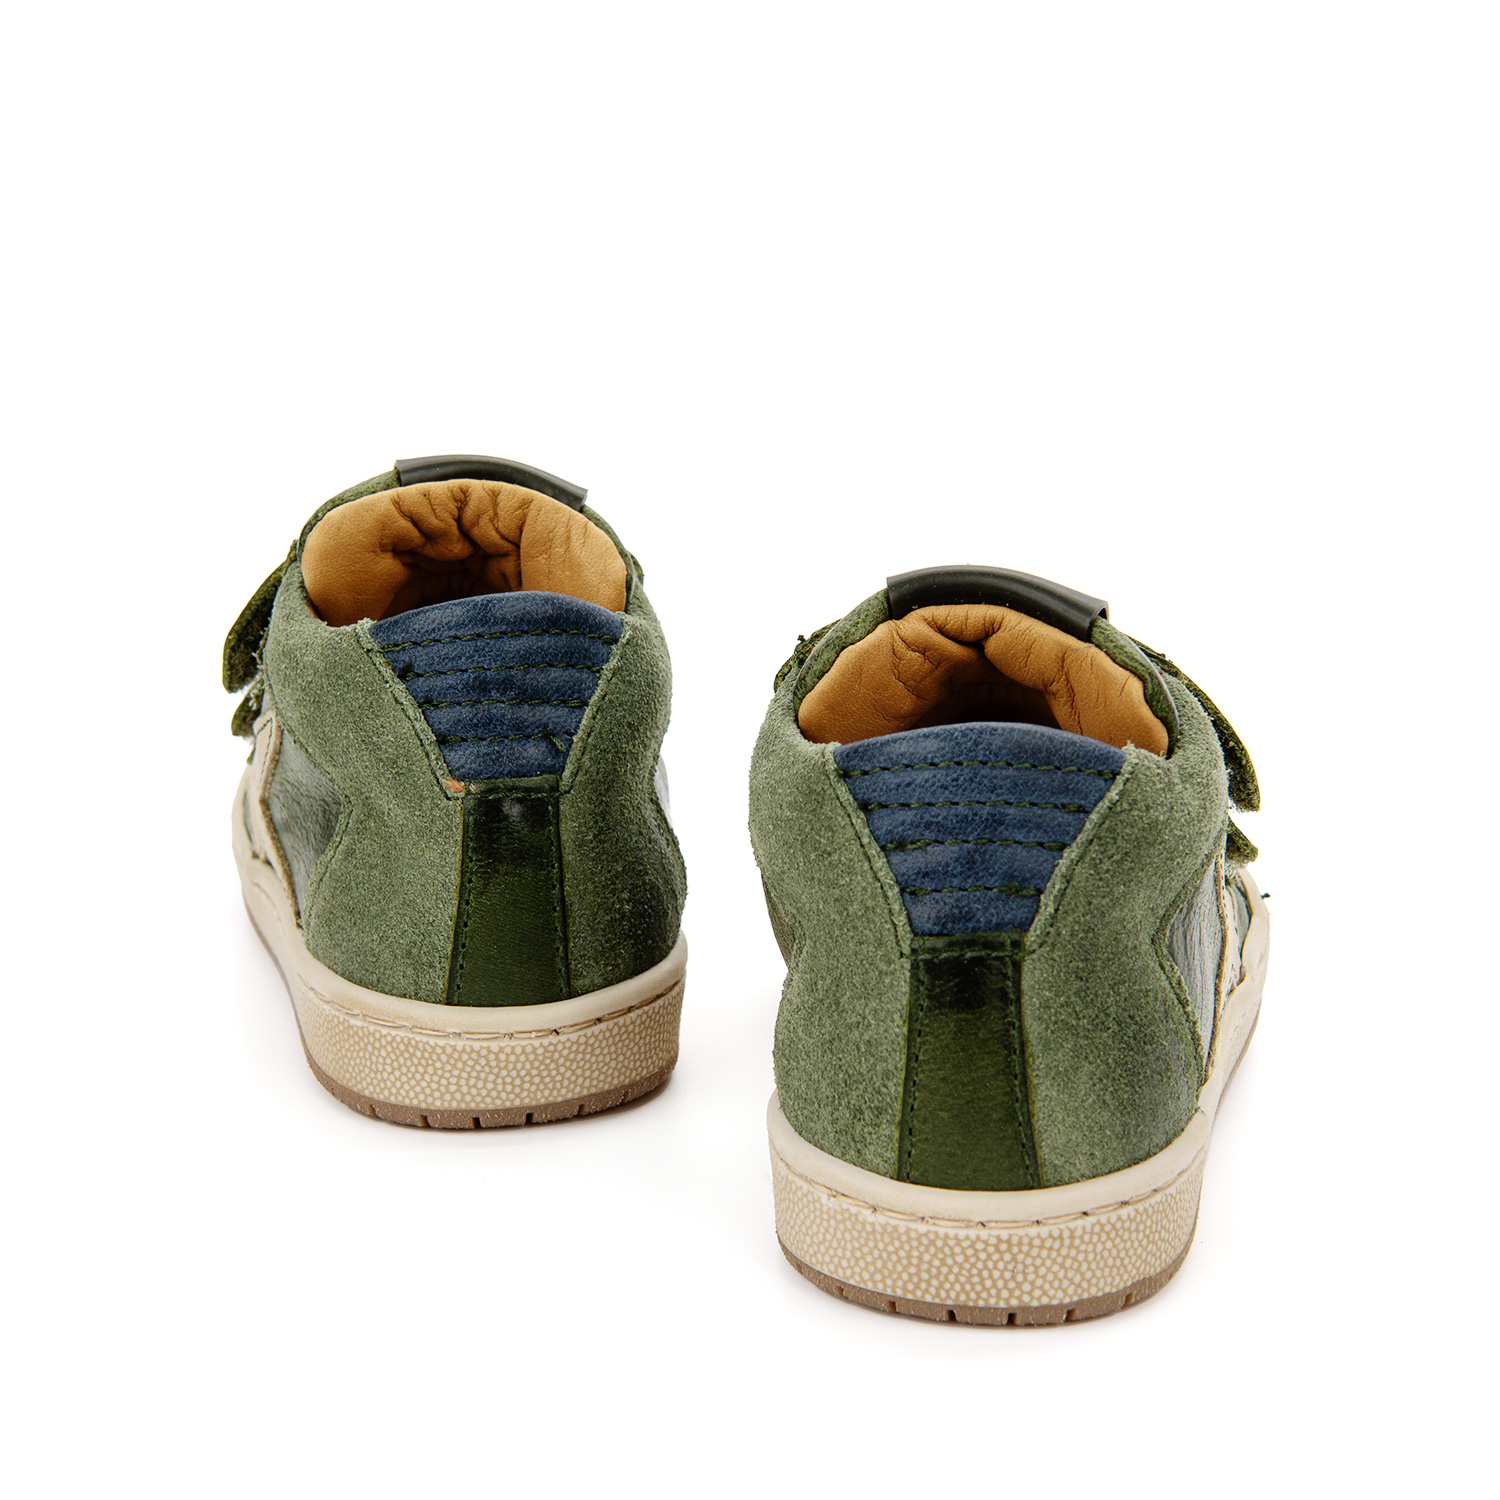 NOIP calf olive + navy